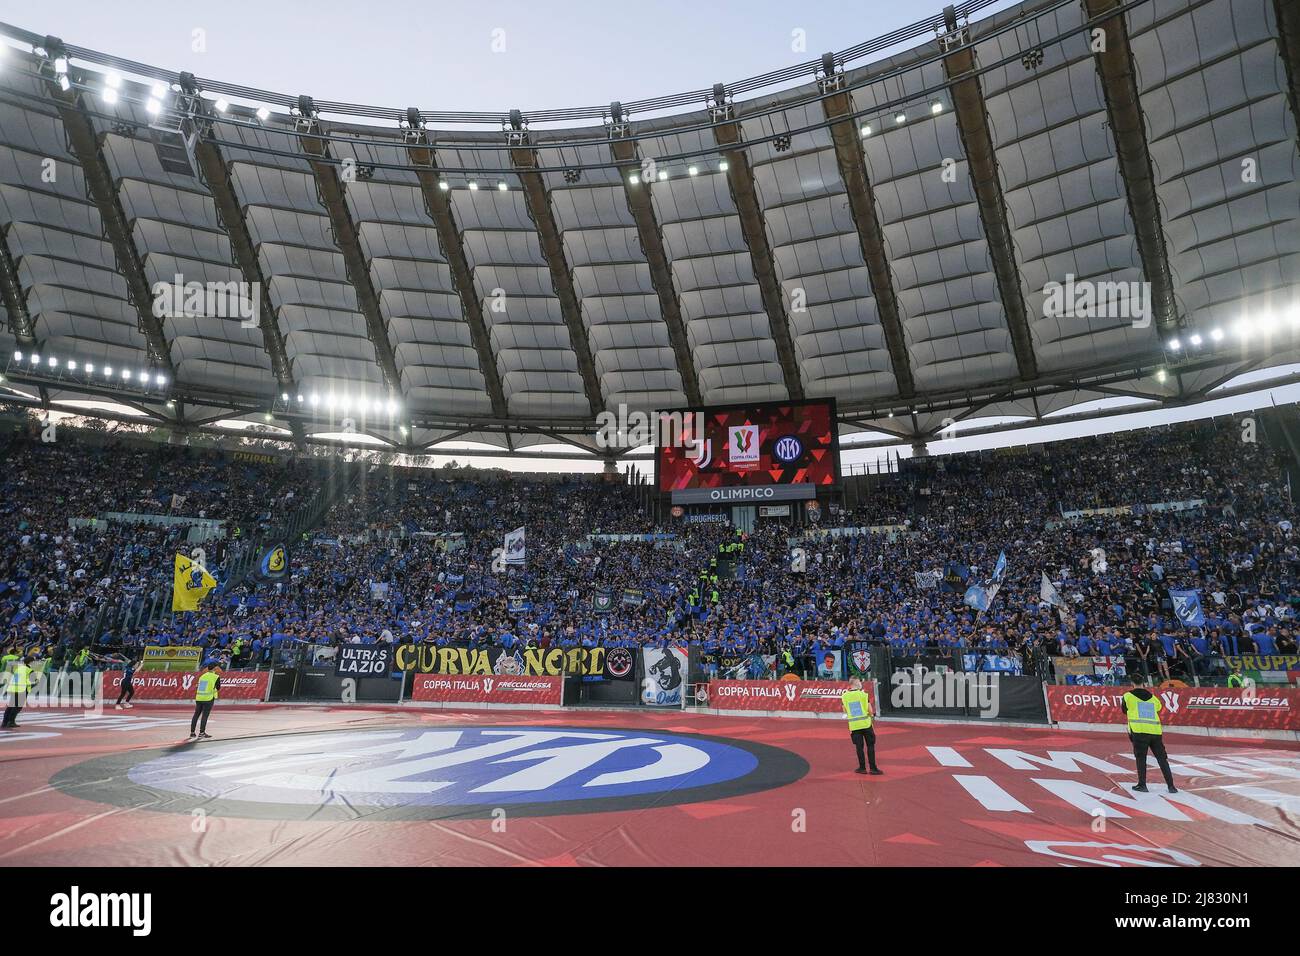 General view of Curva nord Olimpico Stadium supporters inter during the Coppa  Italia final between Juventus Vs Inter at the Olimpico Stadium Rome, centre  Italy, on May 11, 2022 Stock Photo - Alamy